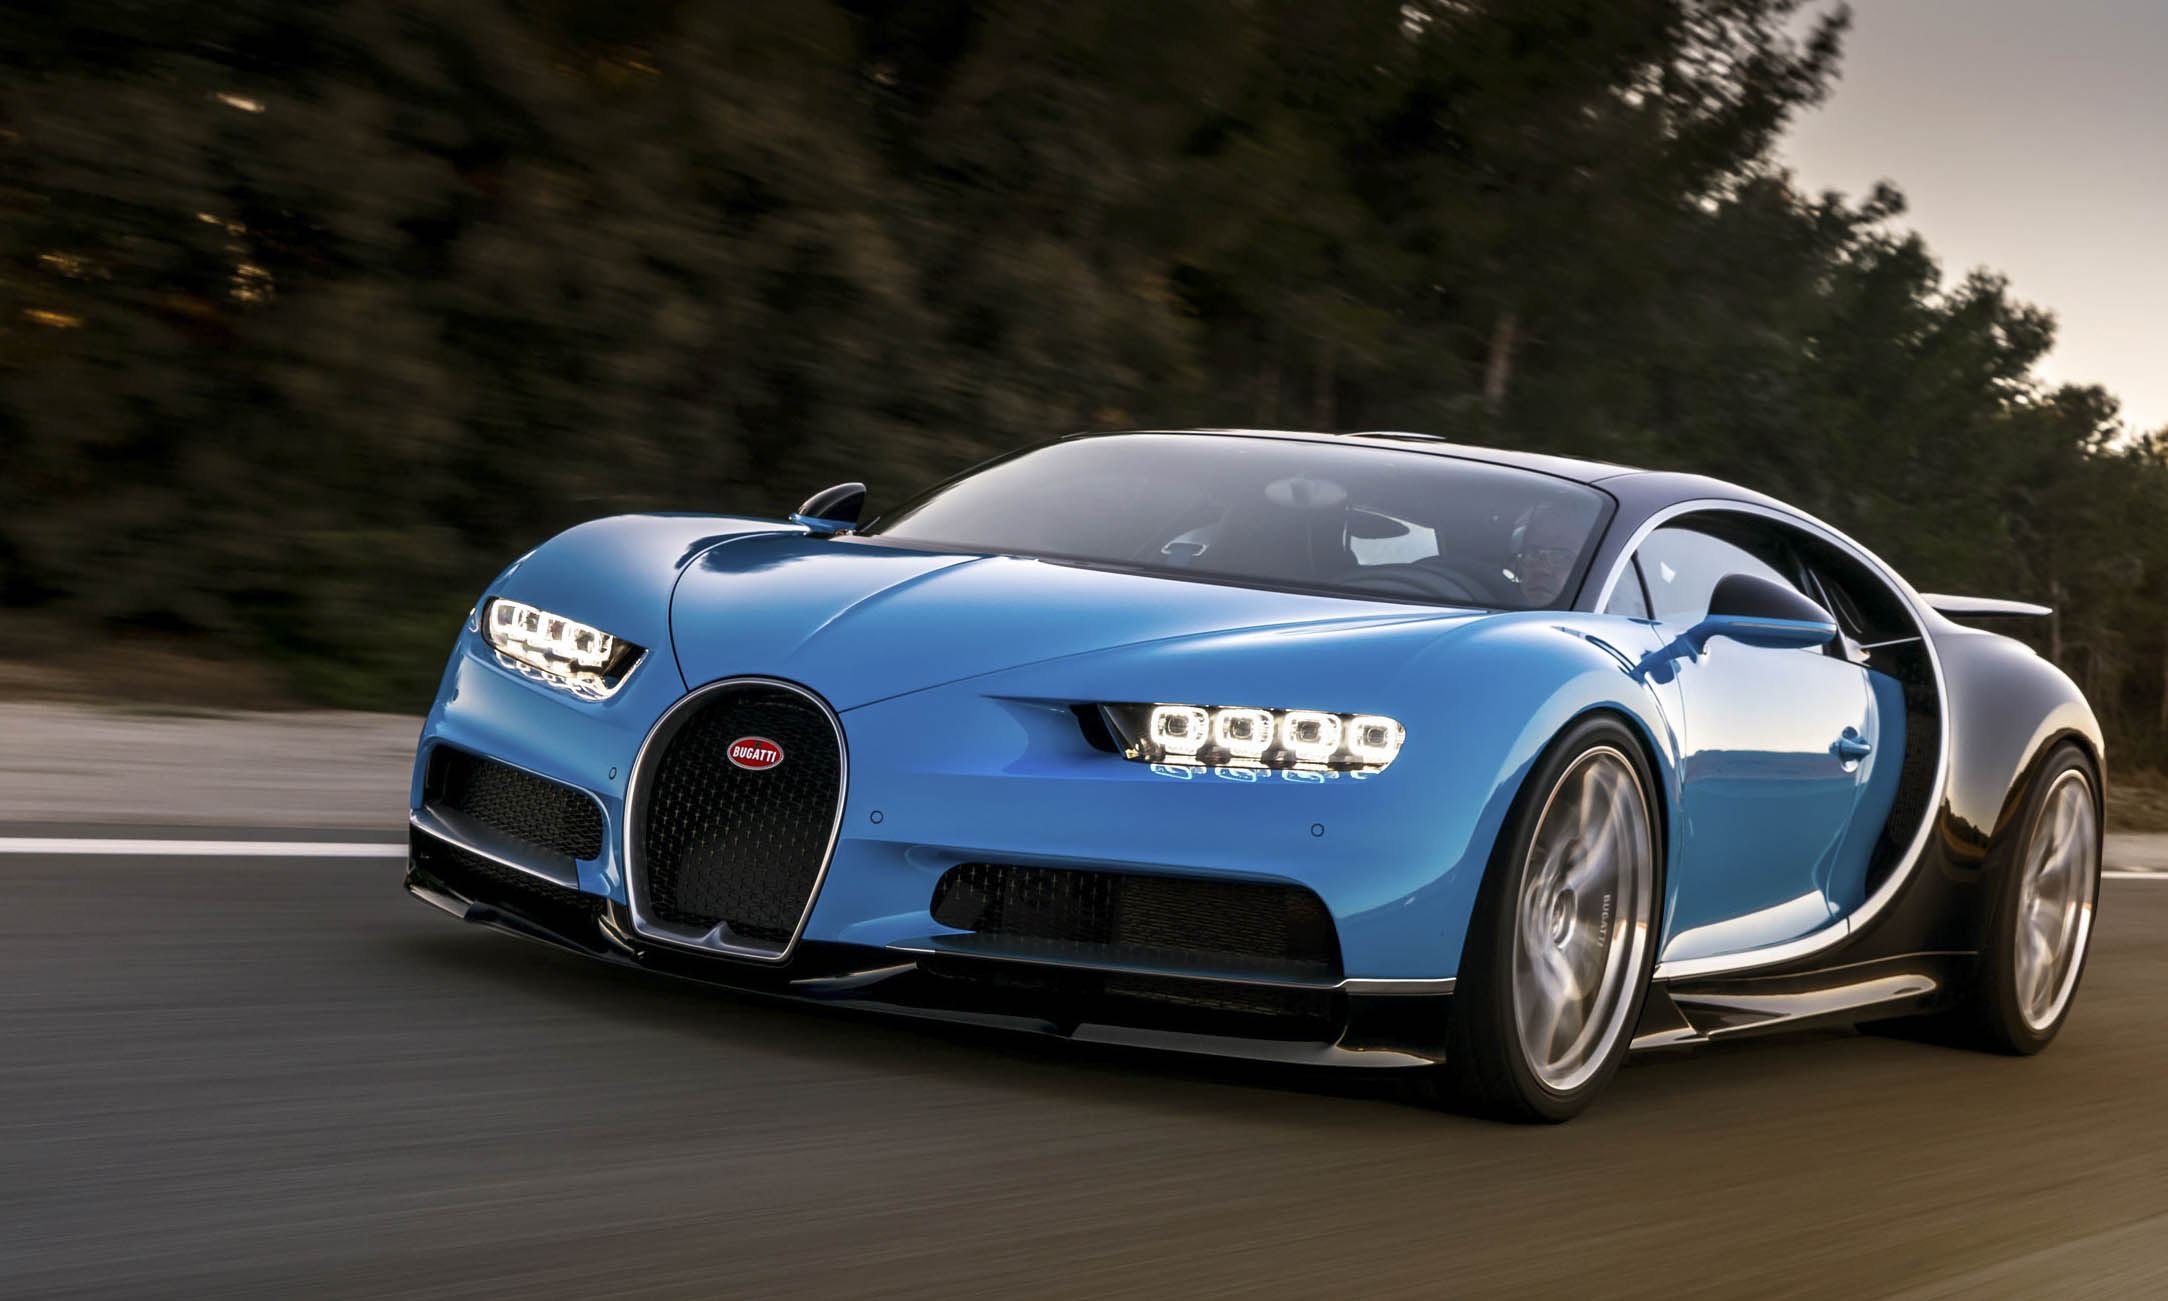 <p>          When the Chiron was introduced in 2016, it boasted a newly developed 8-liter quad-turbo W16 engine producing 1500 horsepower and an insane 1180 lb-ft of torque. With all that power being sent to the road via a sophisticated all-wheel drive system, the Chiron could reach 62 mph in just 2.5 seconds. As if that wasn’t impressive enough, the Chiron would continue to 124 mph in about 6.5 seconds, eventually reaching a max speed that was “limited for road use” of 261 mph!         </p>